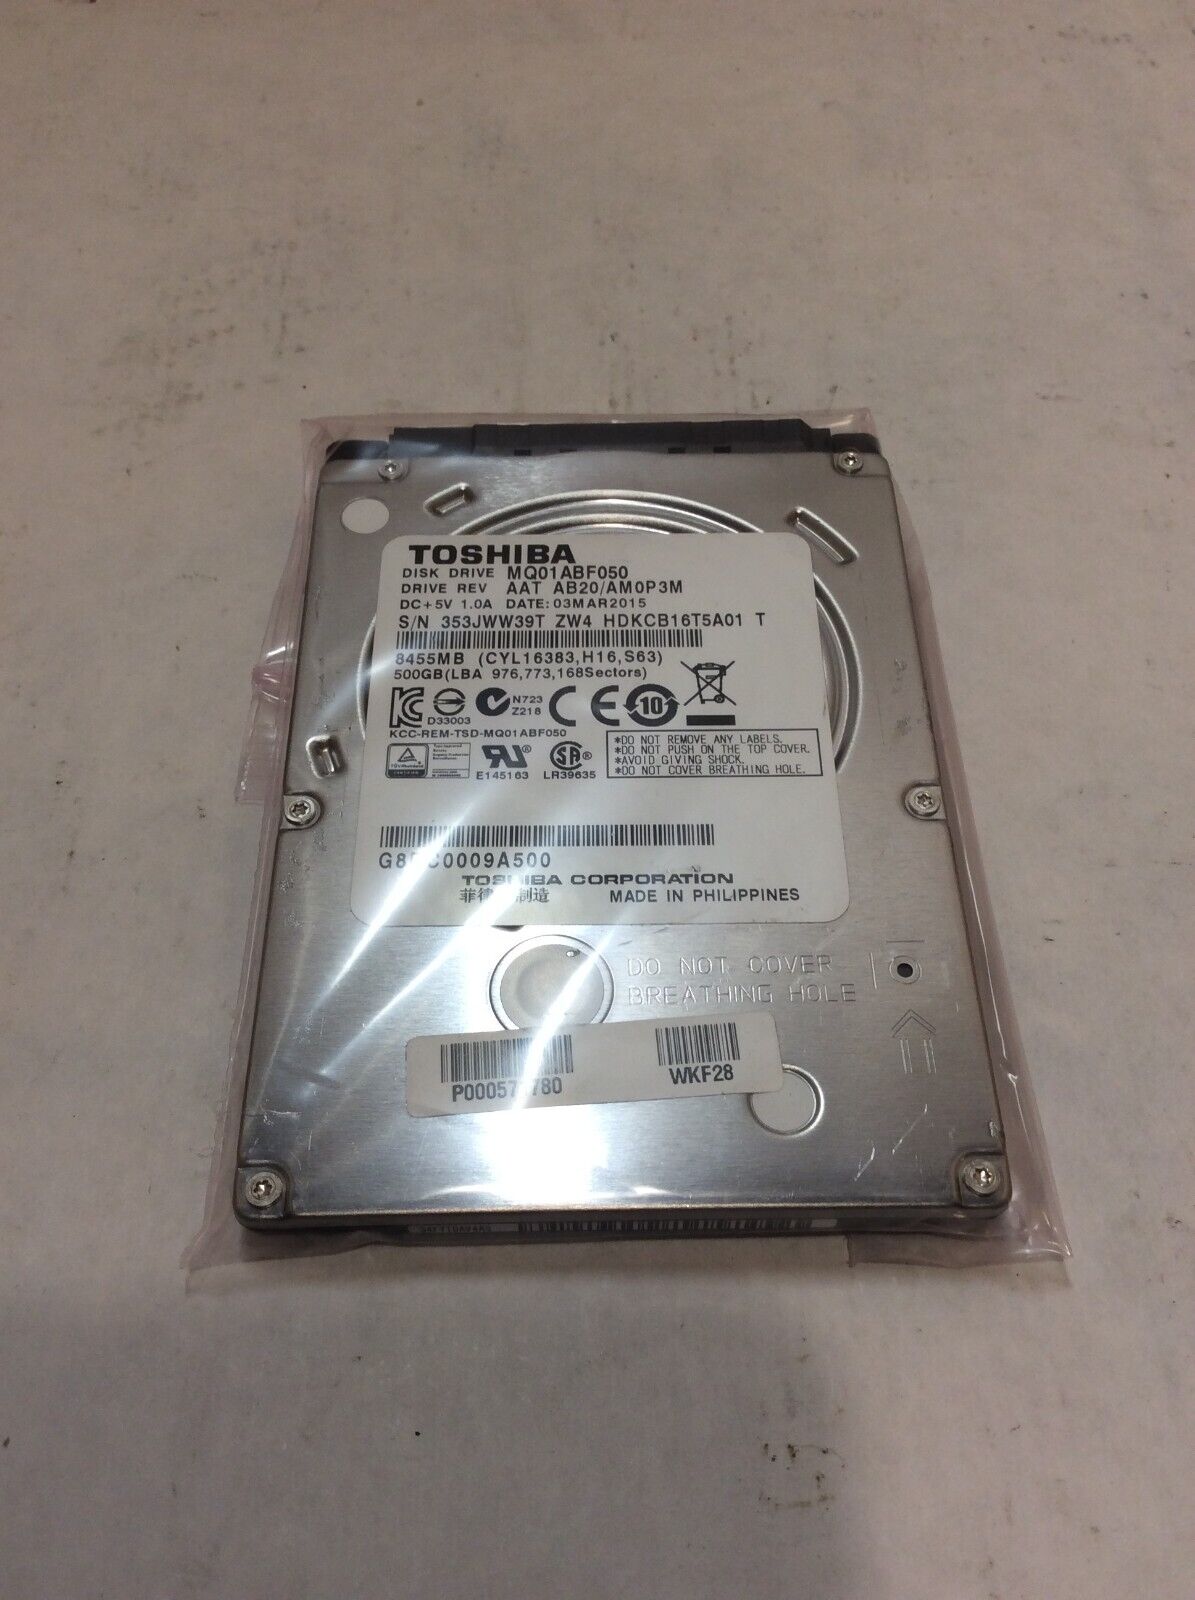 USED 500GB Laptop Hard Drive HDD WIPED - TESTED AND WORKING - VARIOUS BRANDS